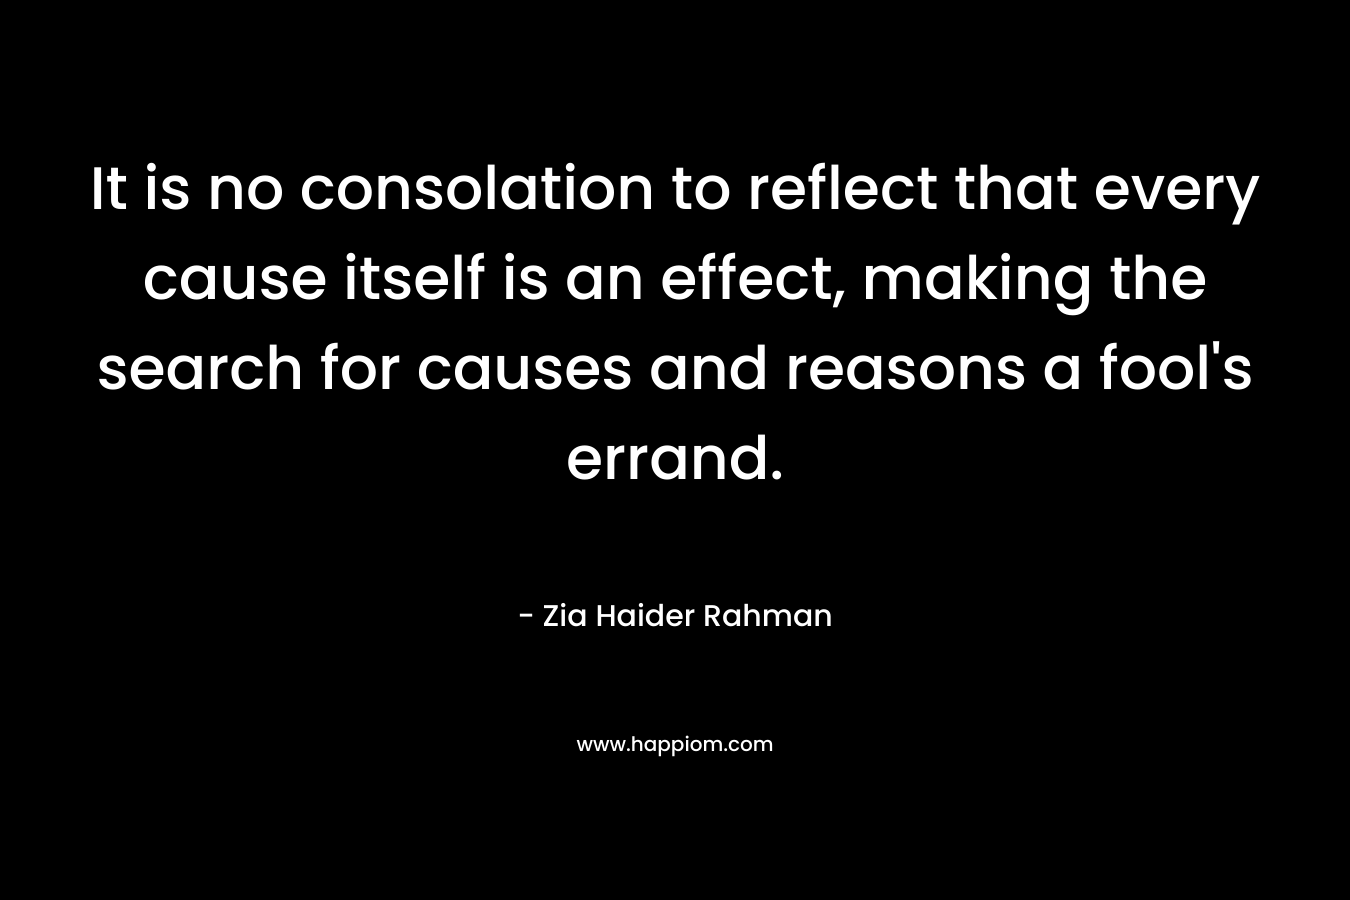 It is no consolation to reflect that every cause itself is an effect, making the search for causes and reasons a fool’s errand. – Zia Haider Rahman